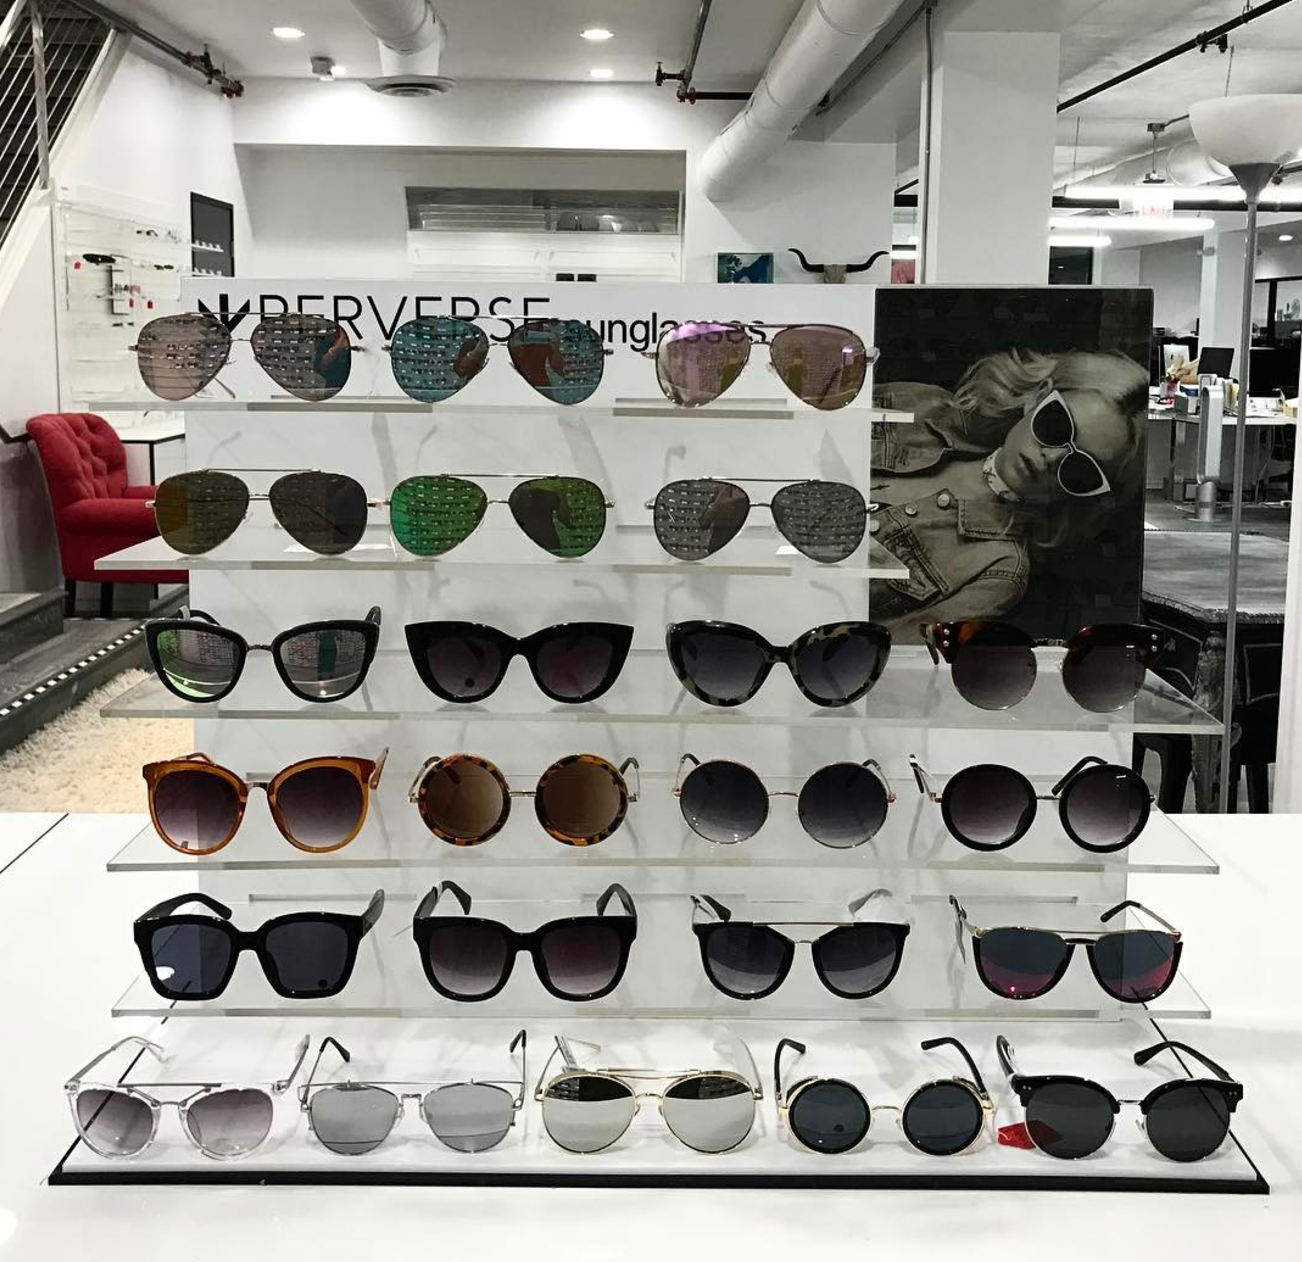 Toni Ko interview, Entity reports on her sunglasses collection